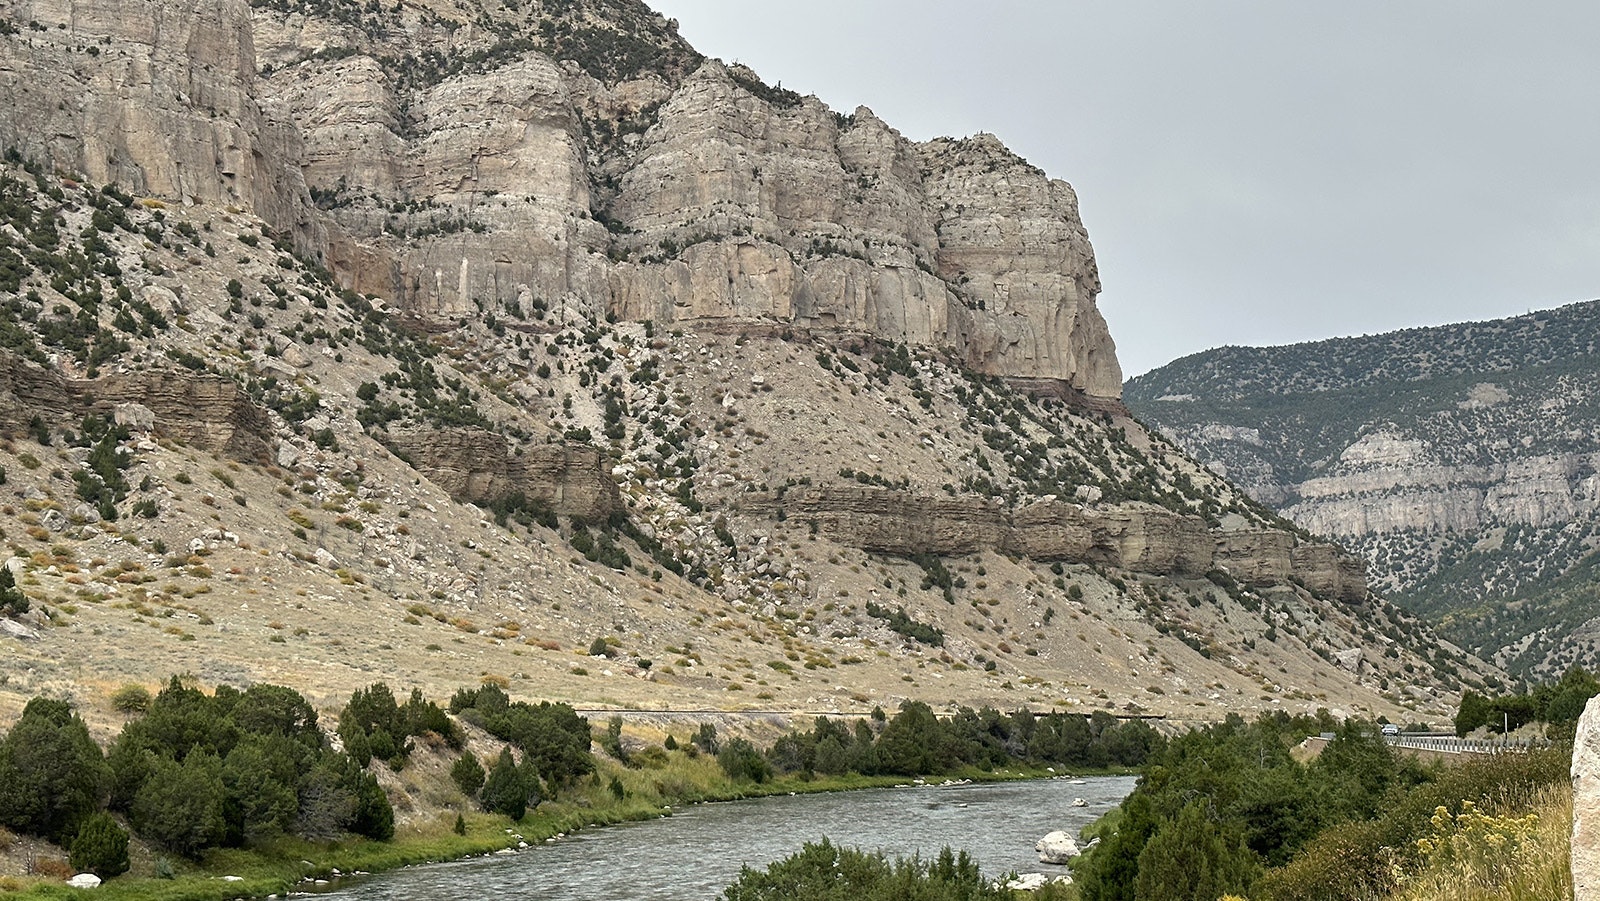 A view inside the Wind River Canyon. At least five different rock formations are visible in this image, and at least 12 rock formations are exposed along the 17 miles of canyon walls.